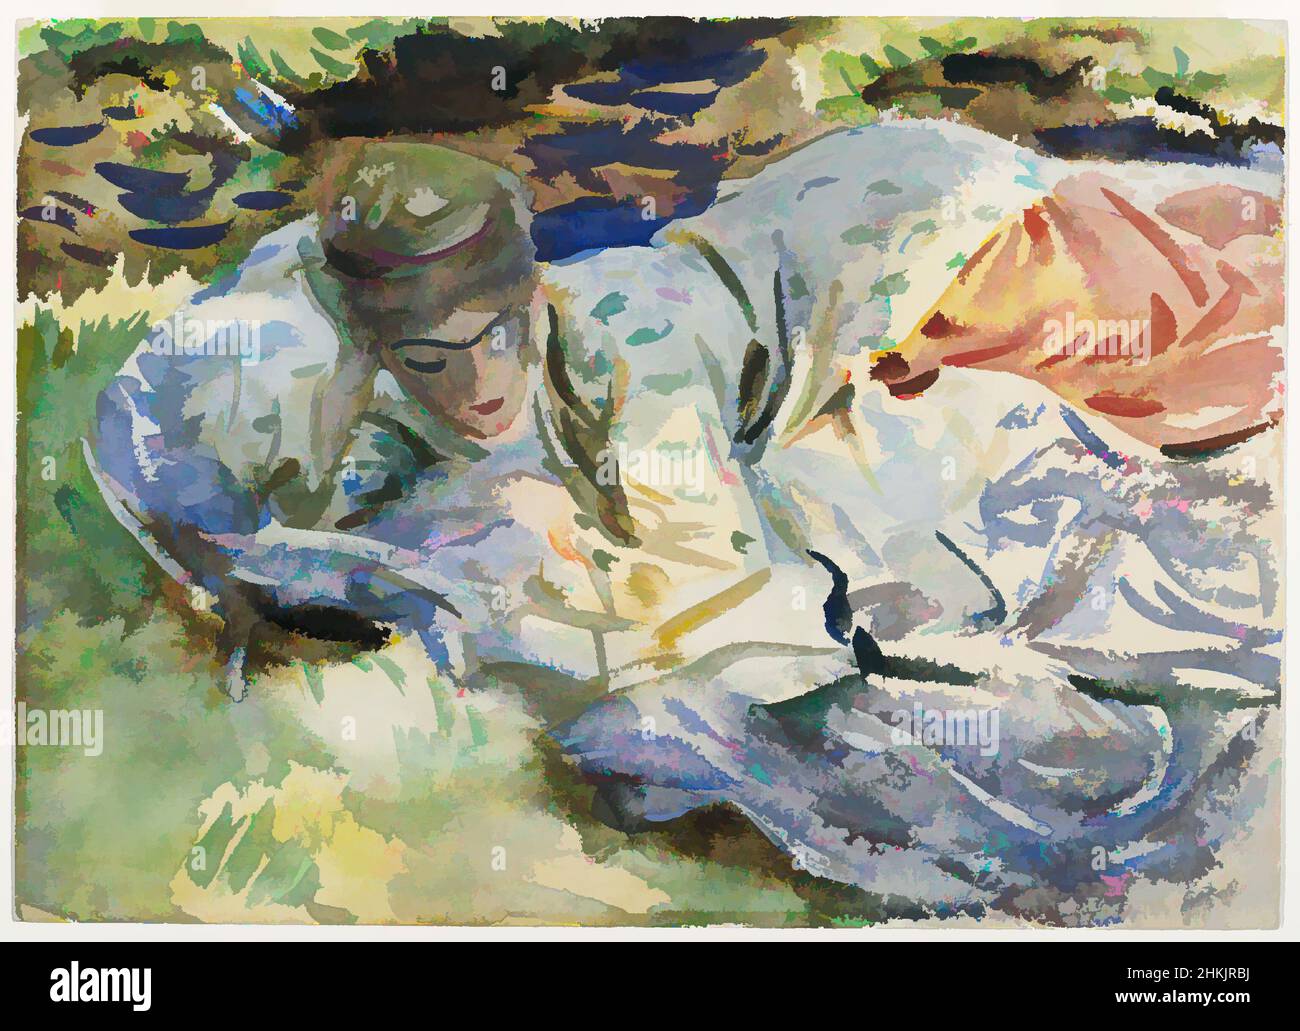 Art inspired by Zuleika, John Singer Sargent, American, born Italy, 1856-1925, Translucent and opaque watercolor, ca. 1906, 10 x 13 15/16 in., 25.4 x 35.4 cm, american, american art, American watercolor, blanket, dappled, exotic, fashion, female beauty, leisure, light and shadow, lounge, Classic works modernized by Artotop with a splash of modernity. Shapes, color and value, eye-catching visual impact on art. Emotions through freedom of artworks in a contemporary way. A timeless message pursuing a wildly creative new direction. Artists turning to the digital medium and creating the Artotop NFT Stock Photo